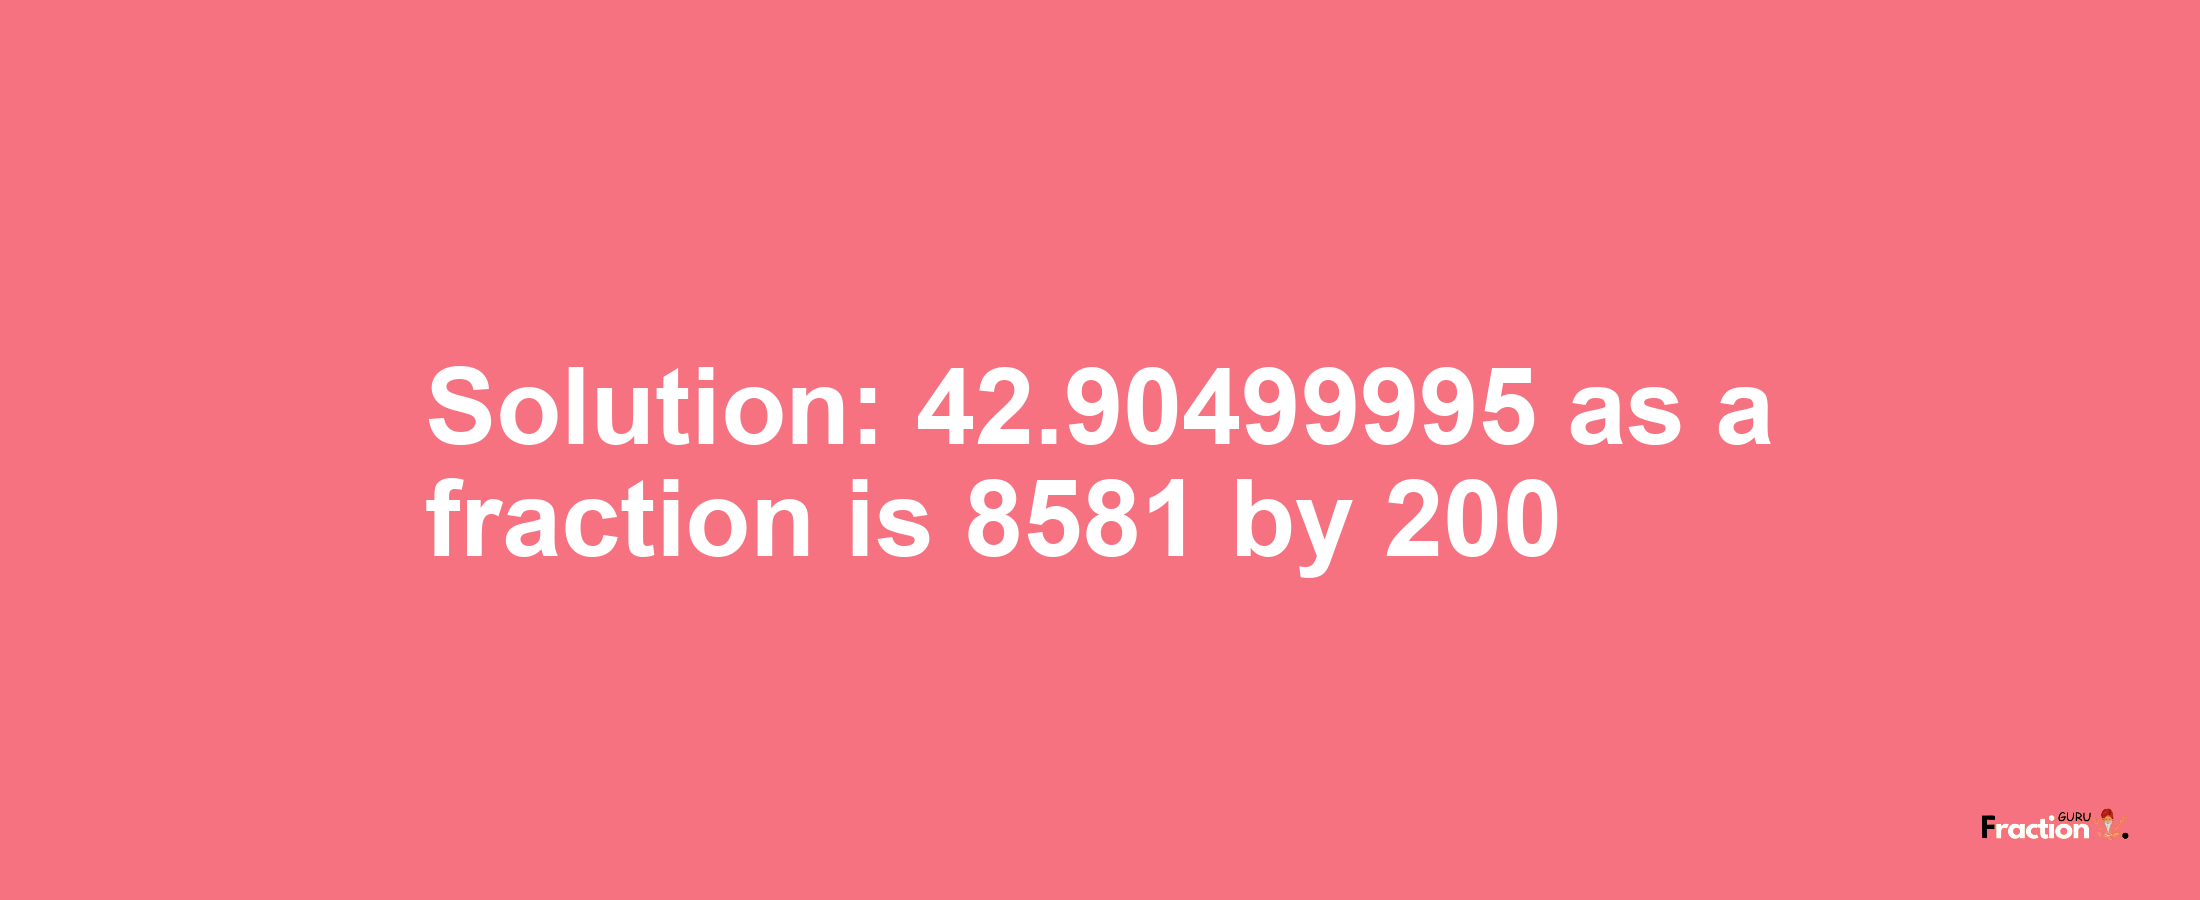 Solution:42.90499995 as a fraction is 8581/200